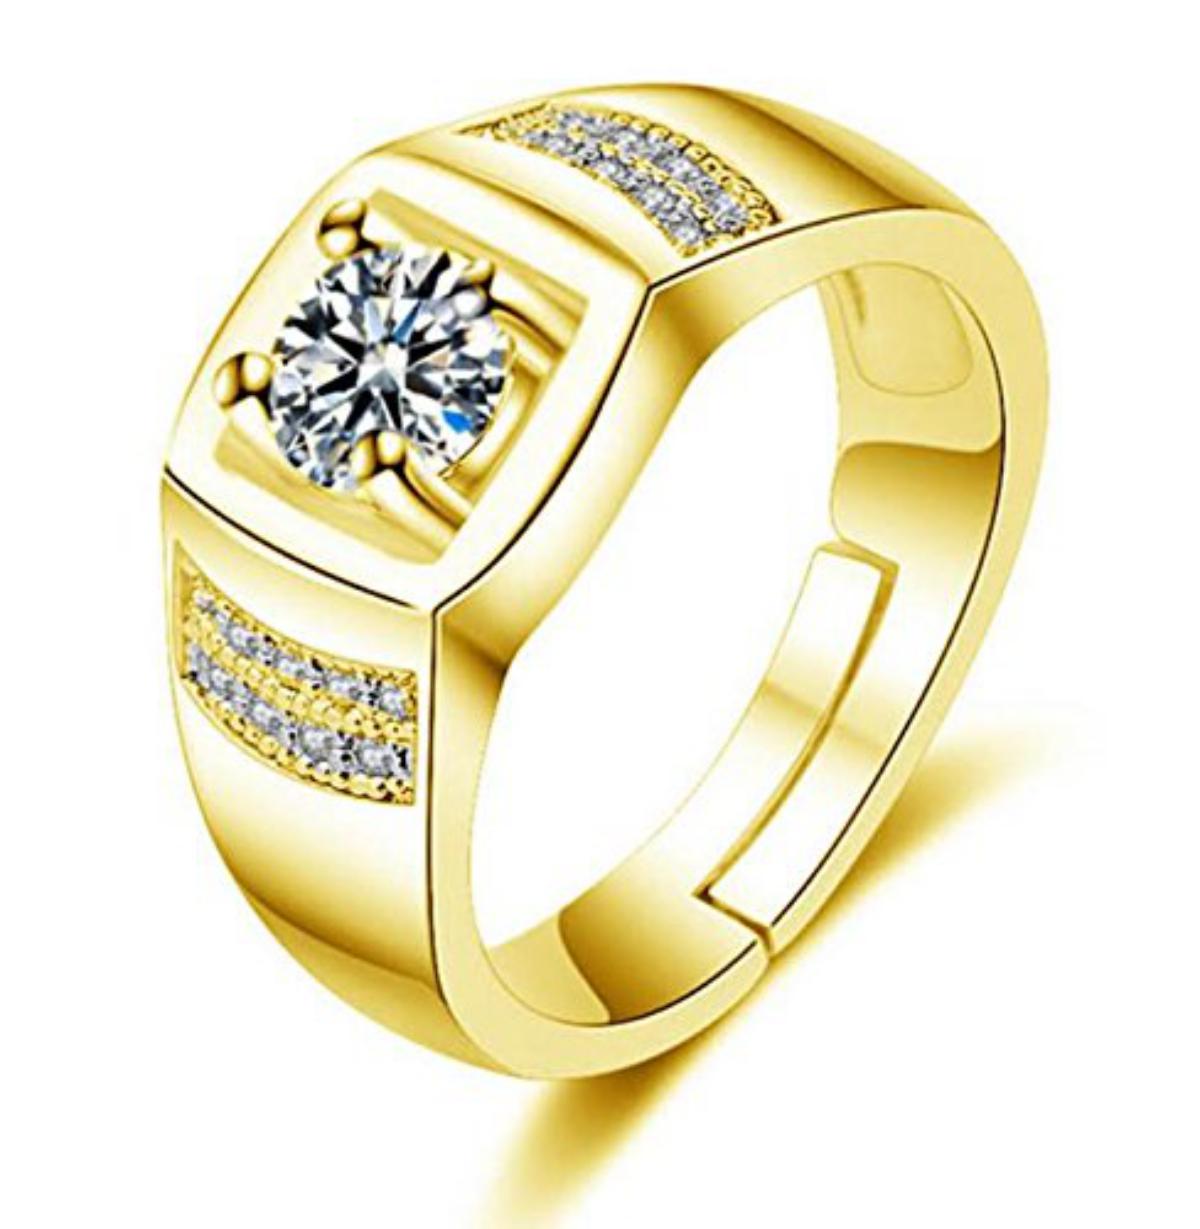 Buy Exclusive Limited Edition 24KT Gold Cubic Zirconia Solitaire ...